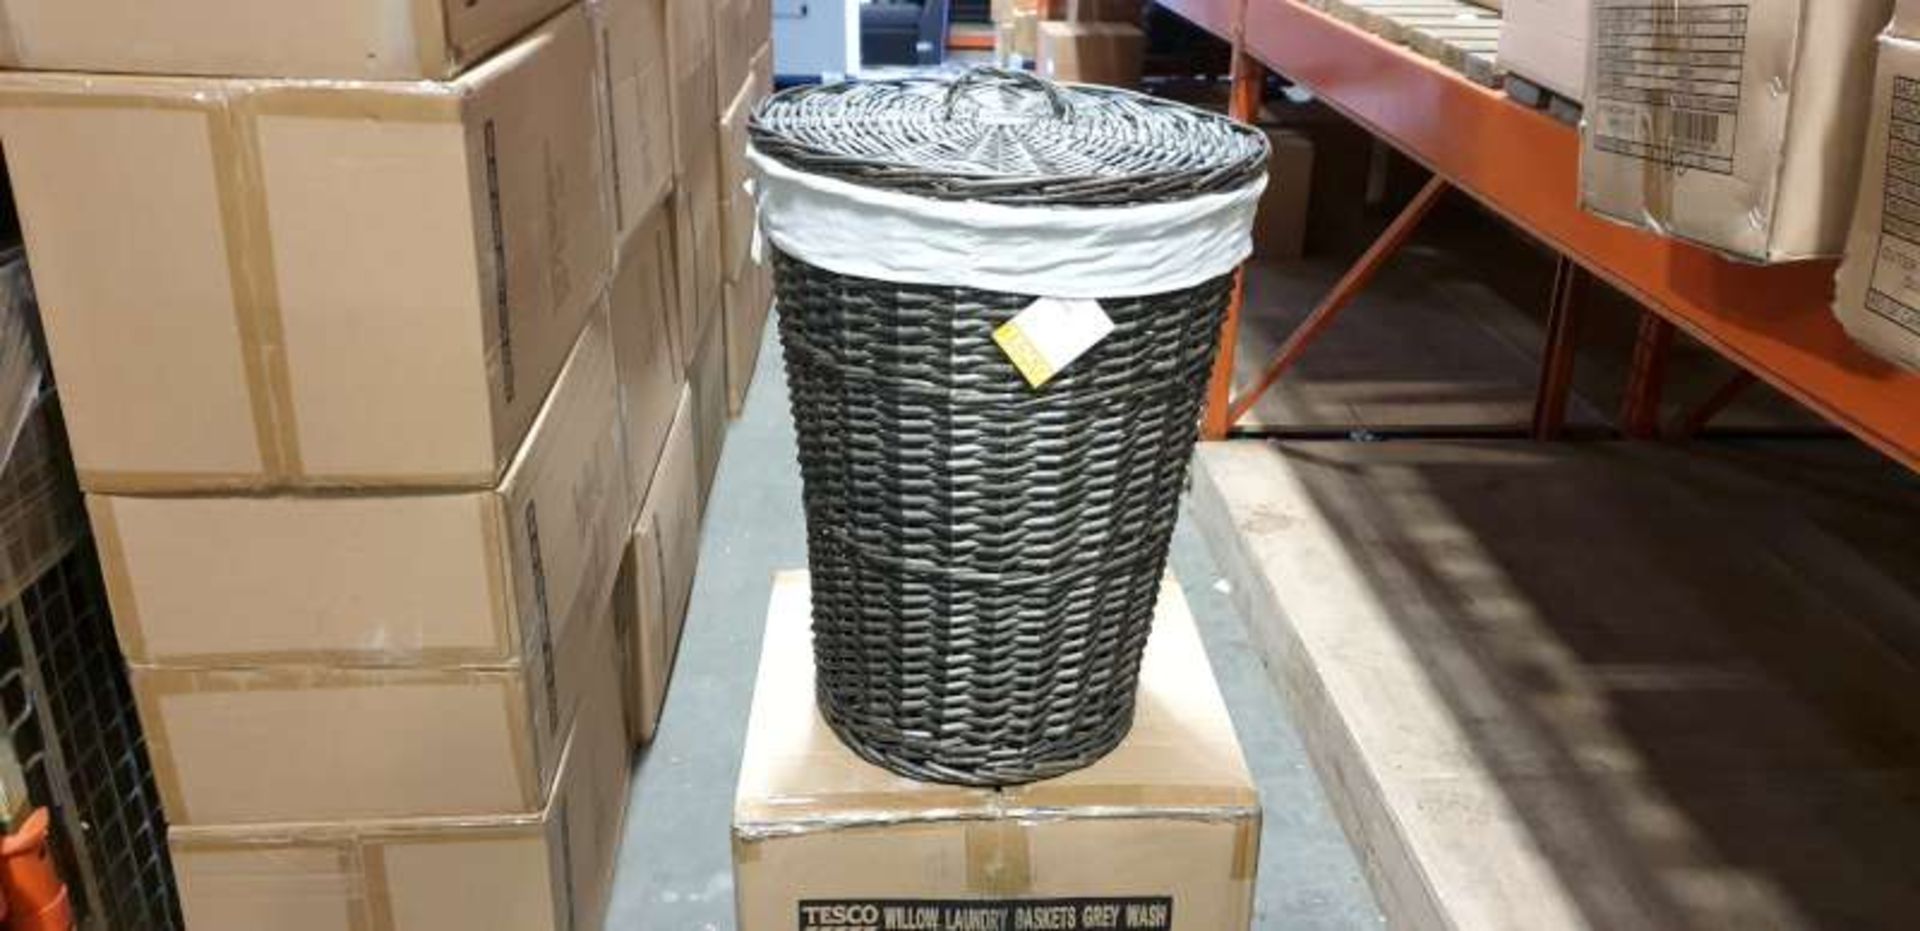 10 X BRAND NEW GREY WASH WILLOW LAUNDRY BASKET IN 5 BOXES